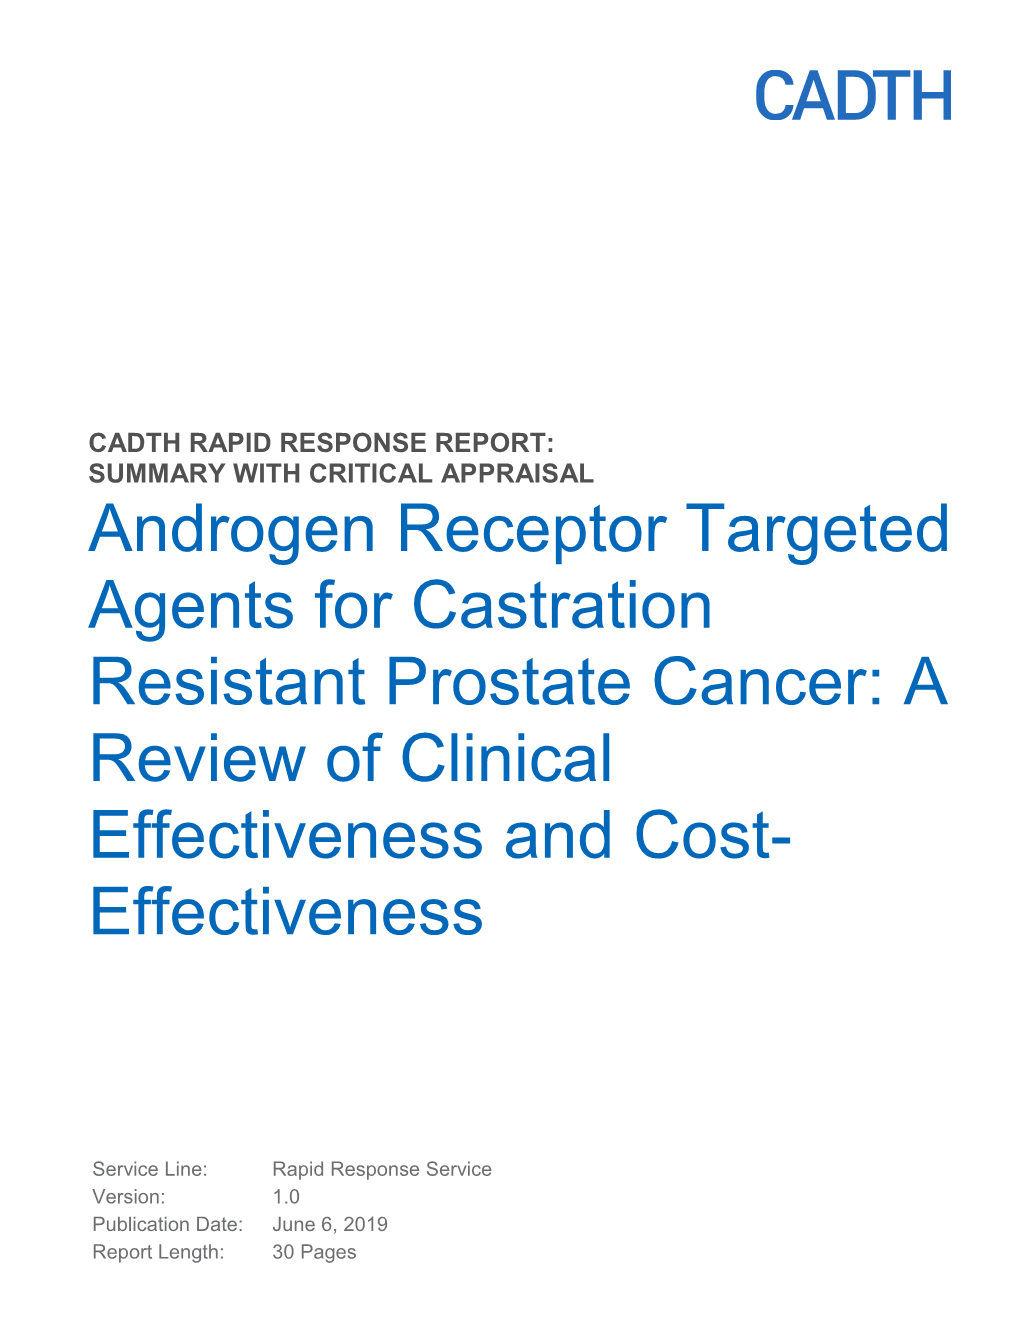 Androgen Receptor Targeted Agents for Castration Resistant Prostate Cancer: a Review of Clinical Effectiveness and Cost- Effectiveness